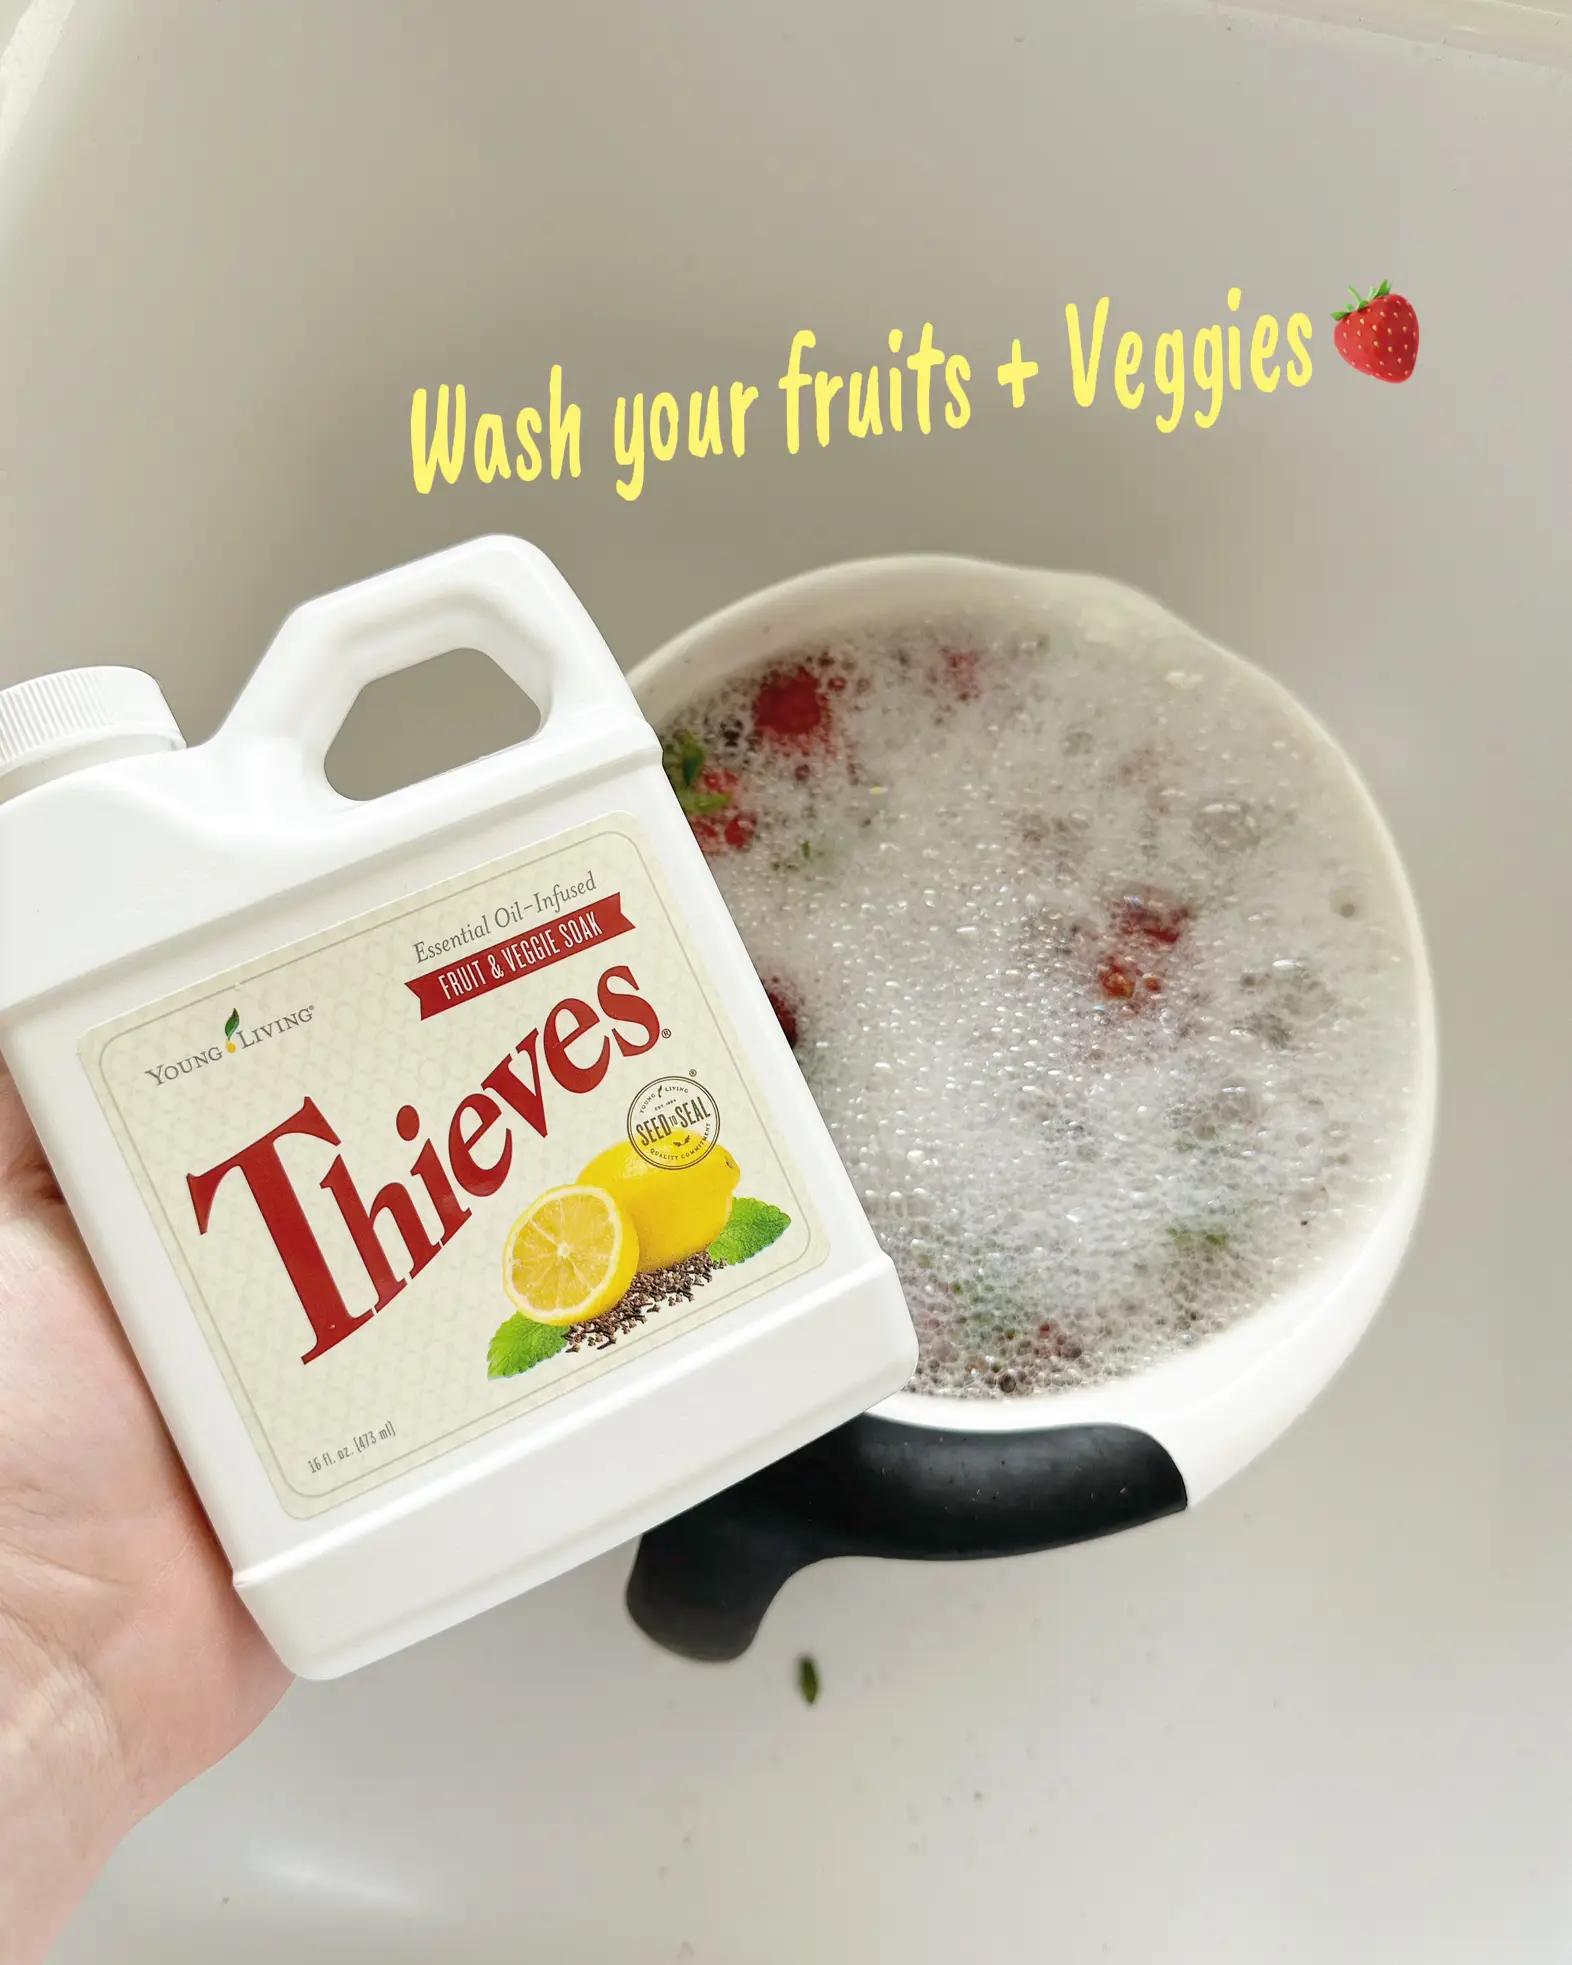 Thieves Fruit & Veggie Soak: The proper way to wash your produce